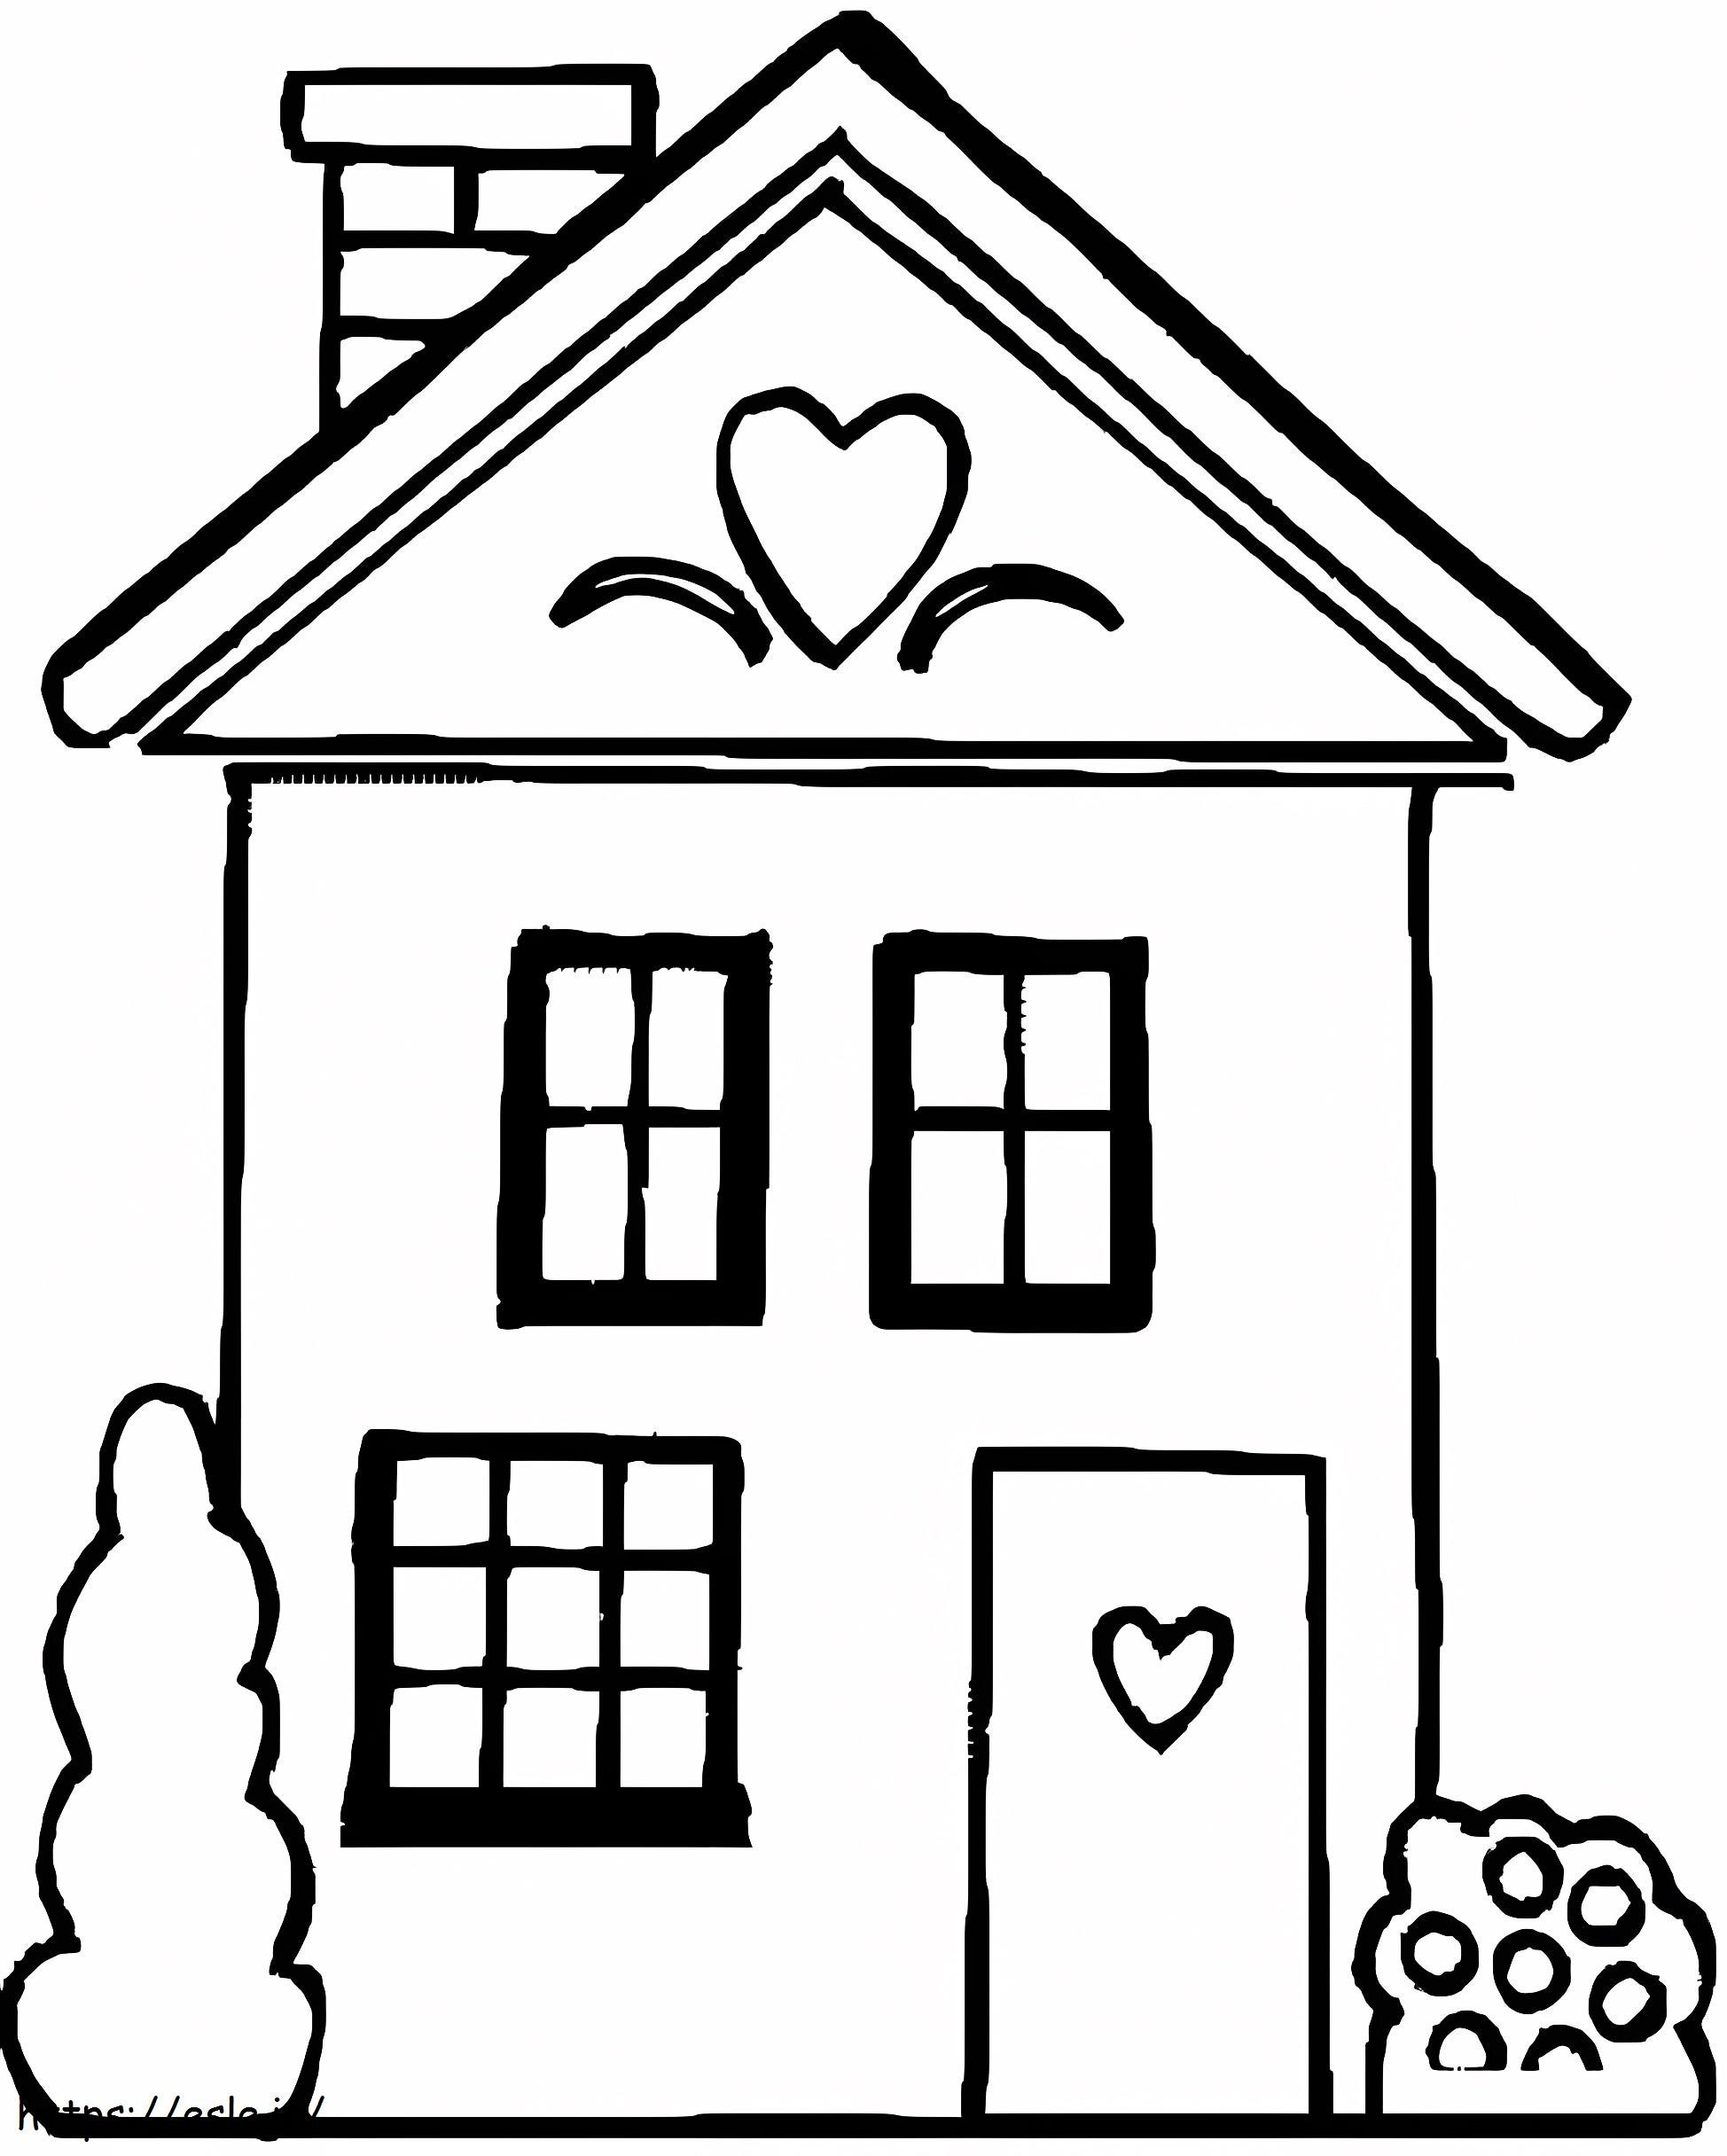 Cute House 1 coloring page